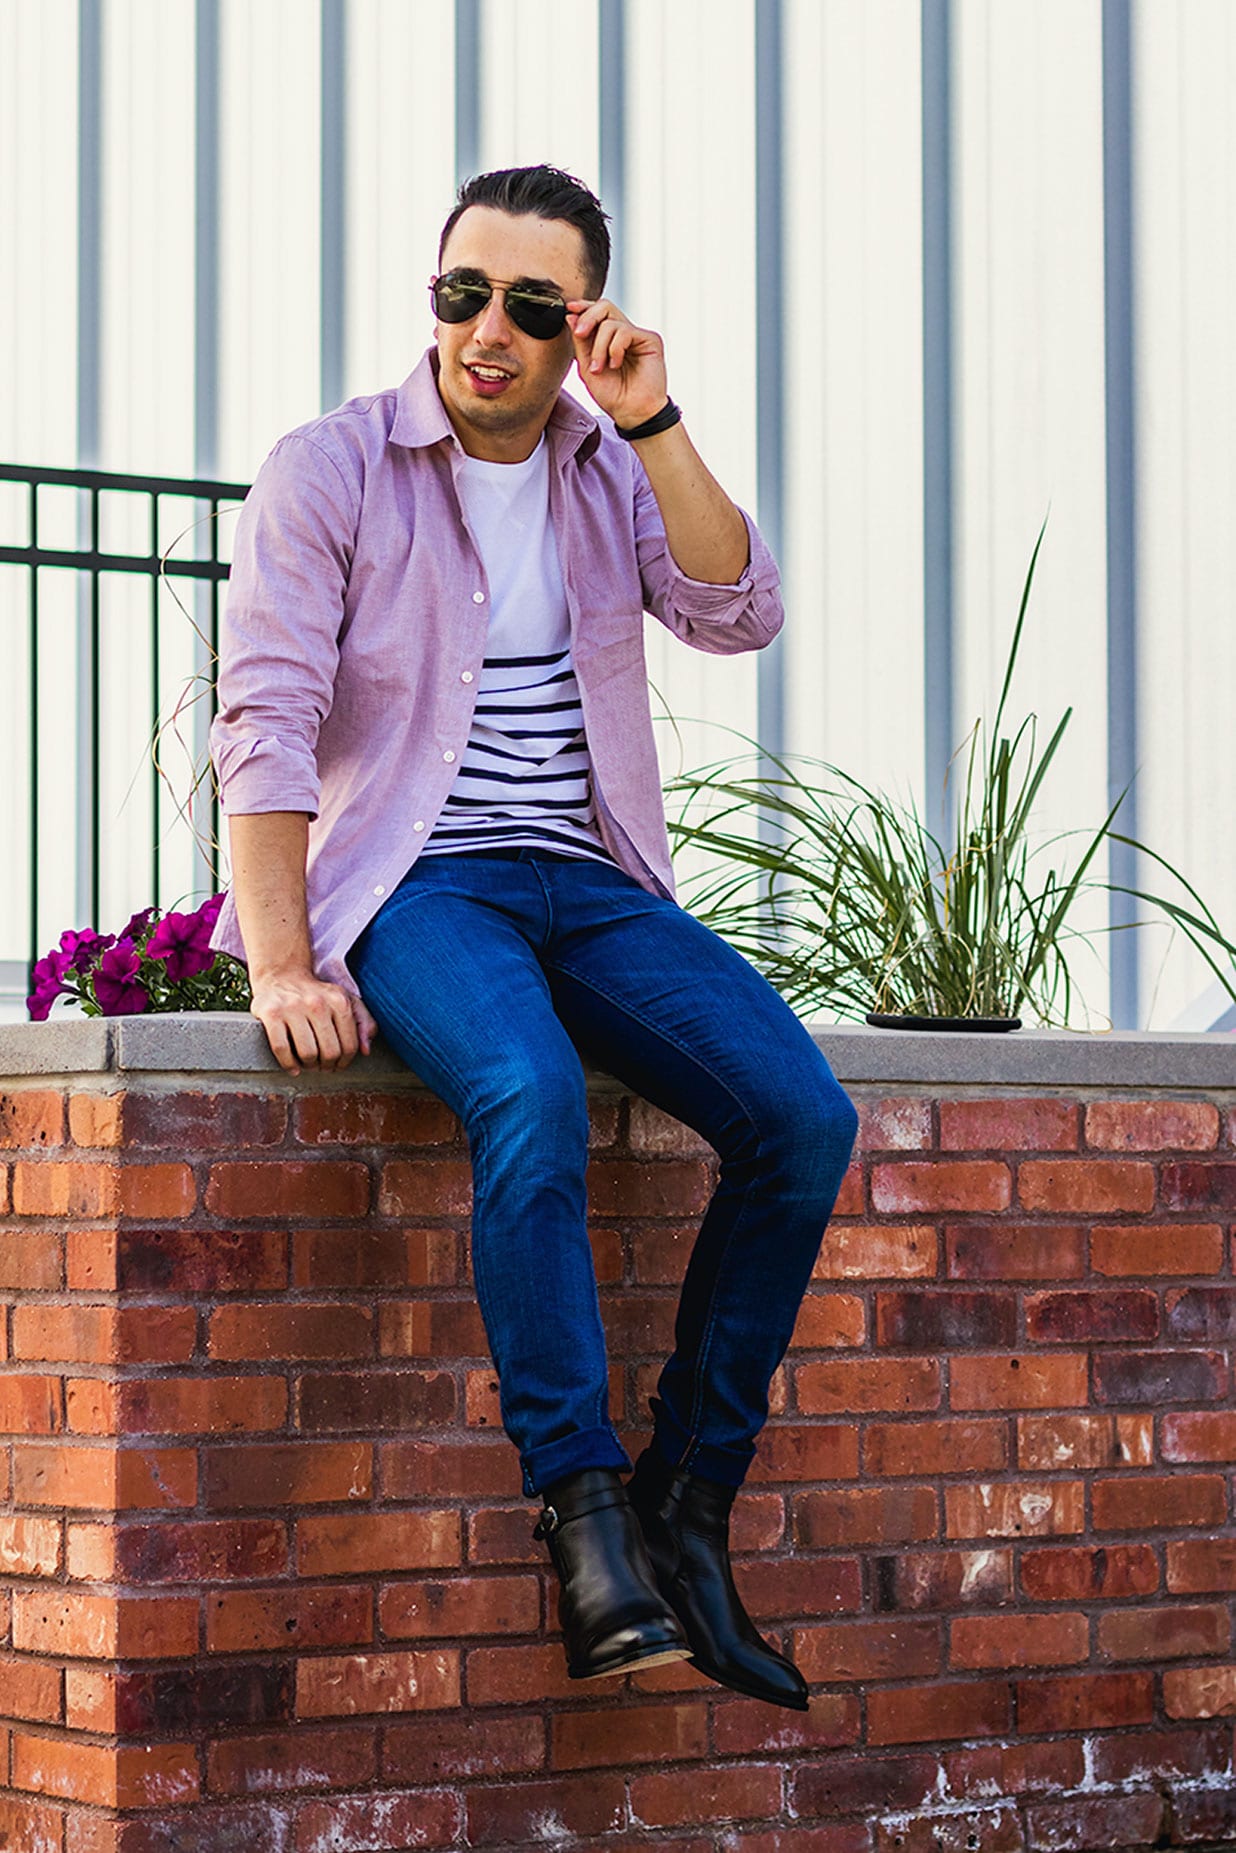 Shake Up Your Office Style with a Wide-Stripe Shirt